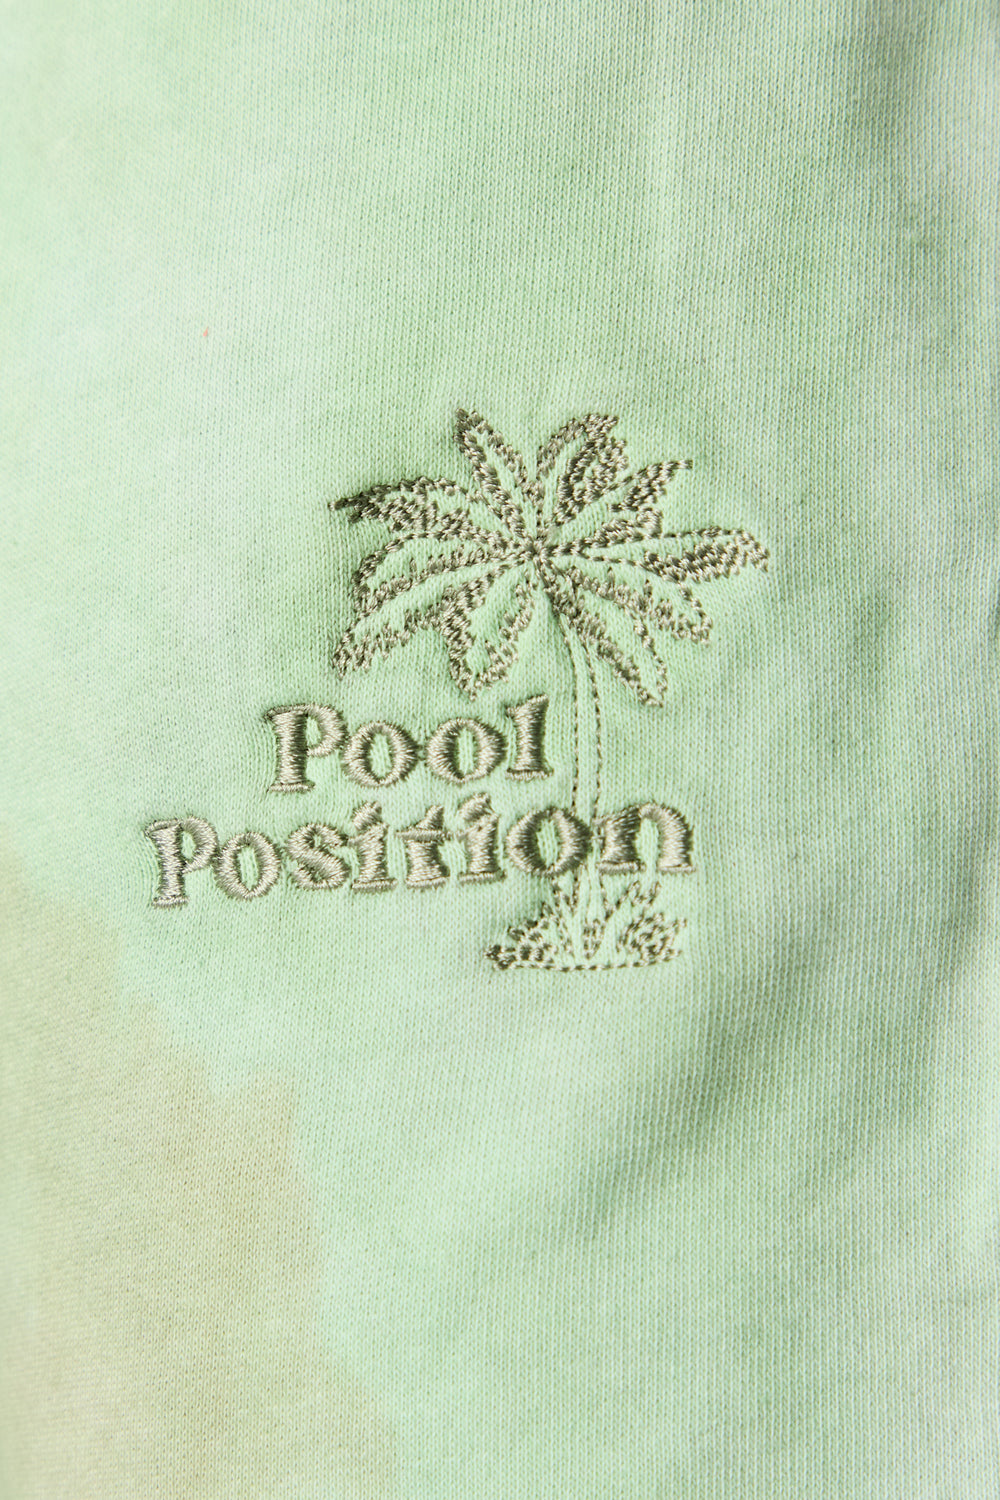 Pool Position Embroidered Tie Dye Short Pool Position Embroidered Tie Dye Short 9